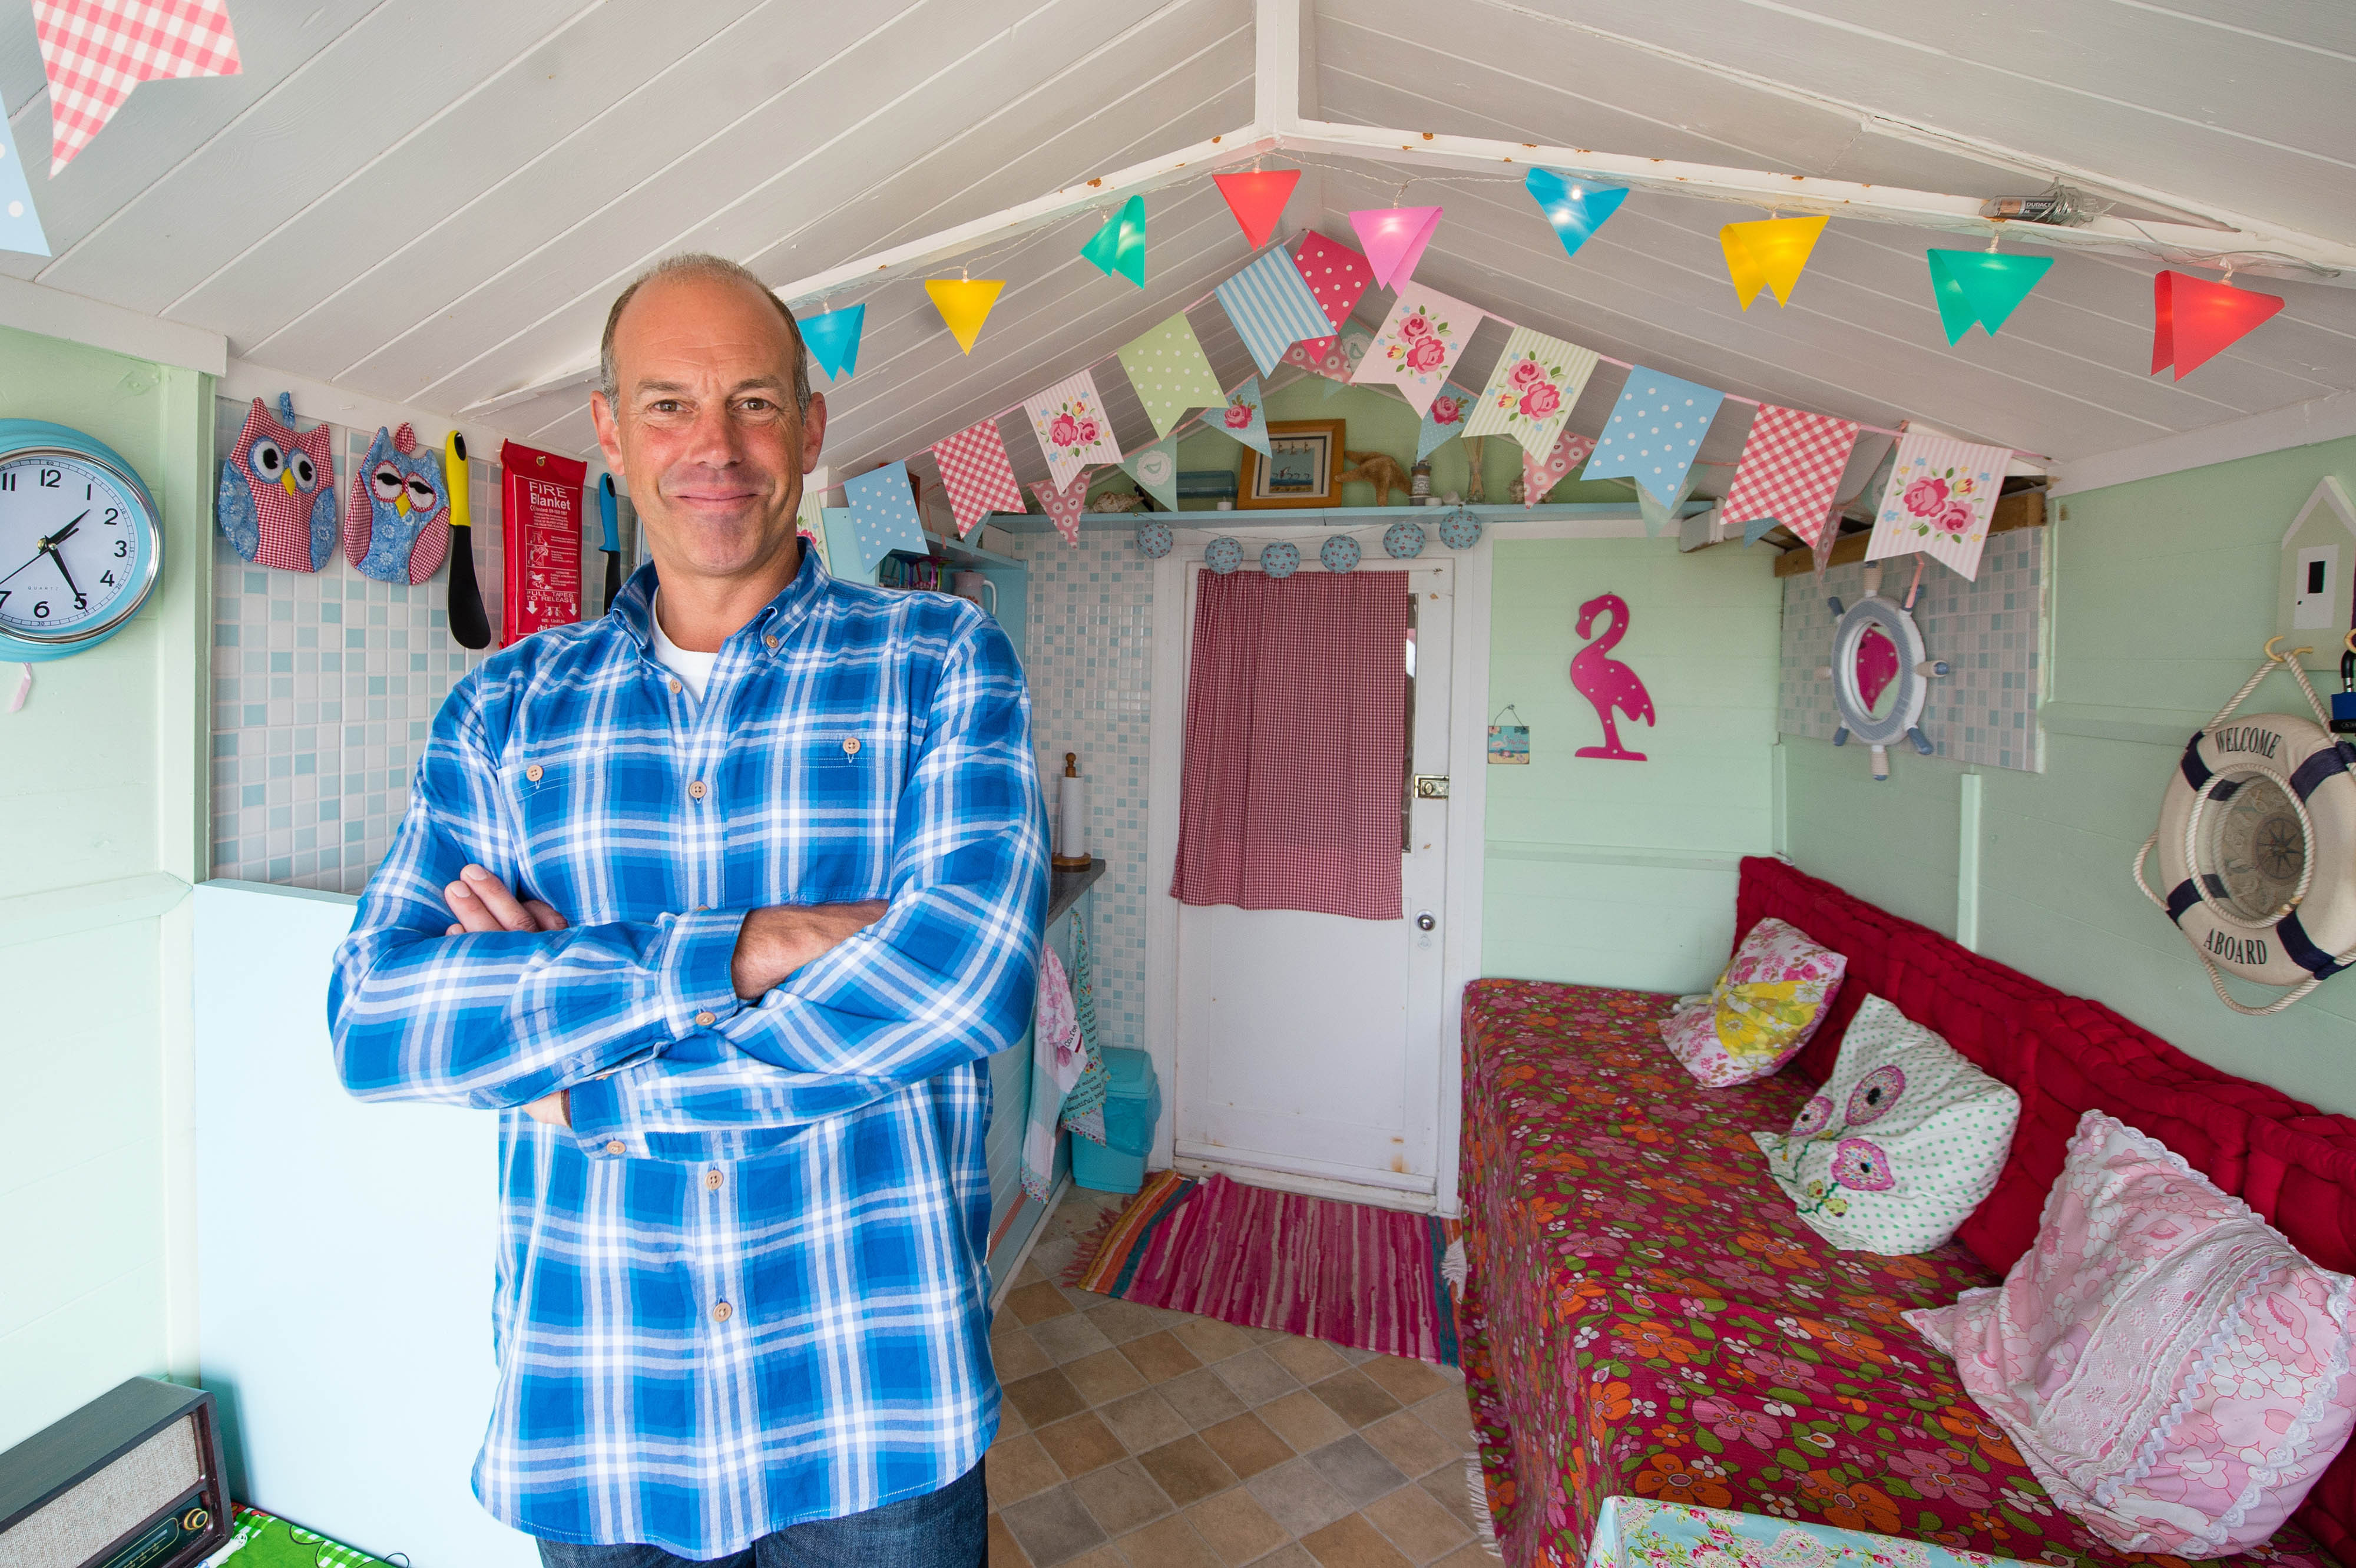 An expert on all kinds of property - including beautifully decorated beach huts.